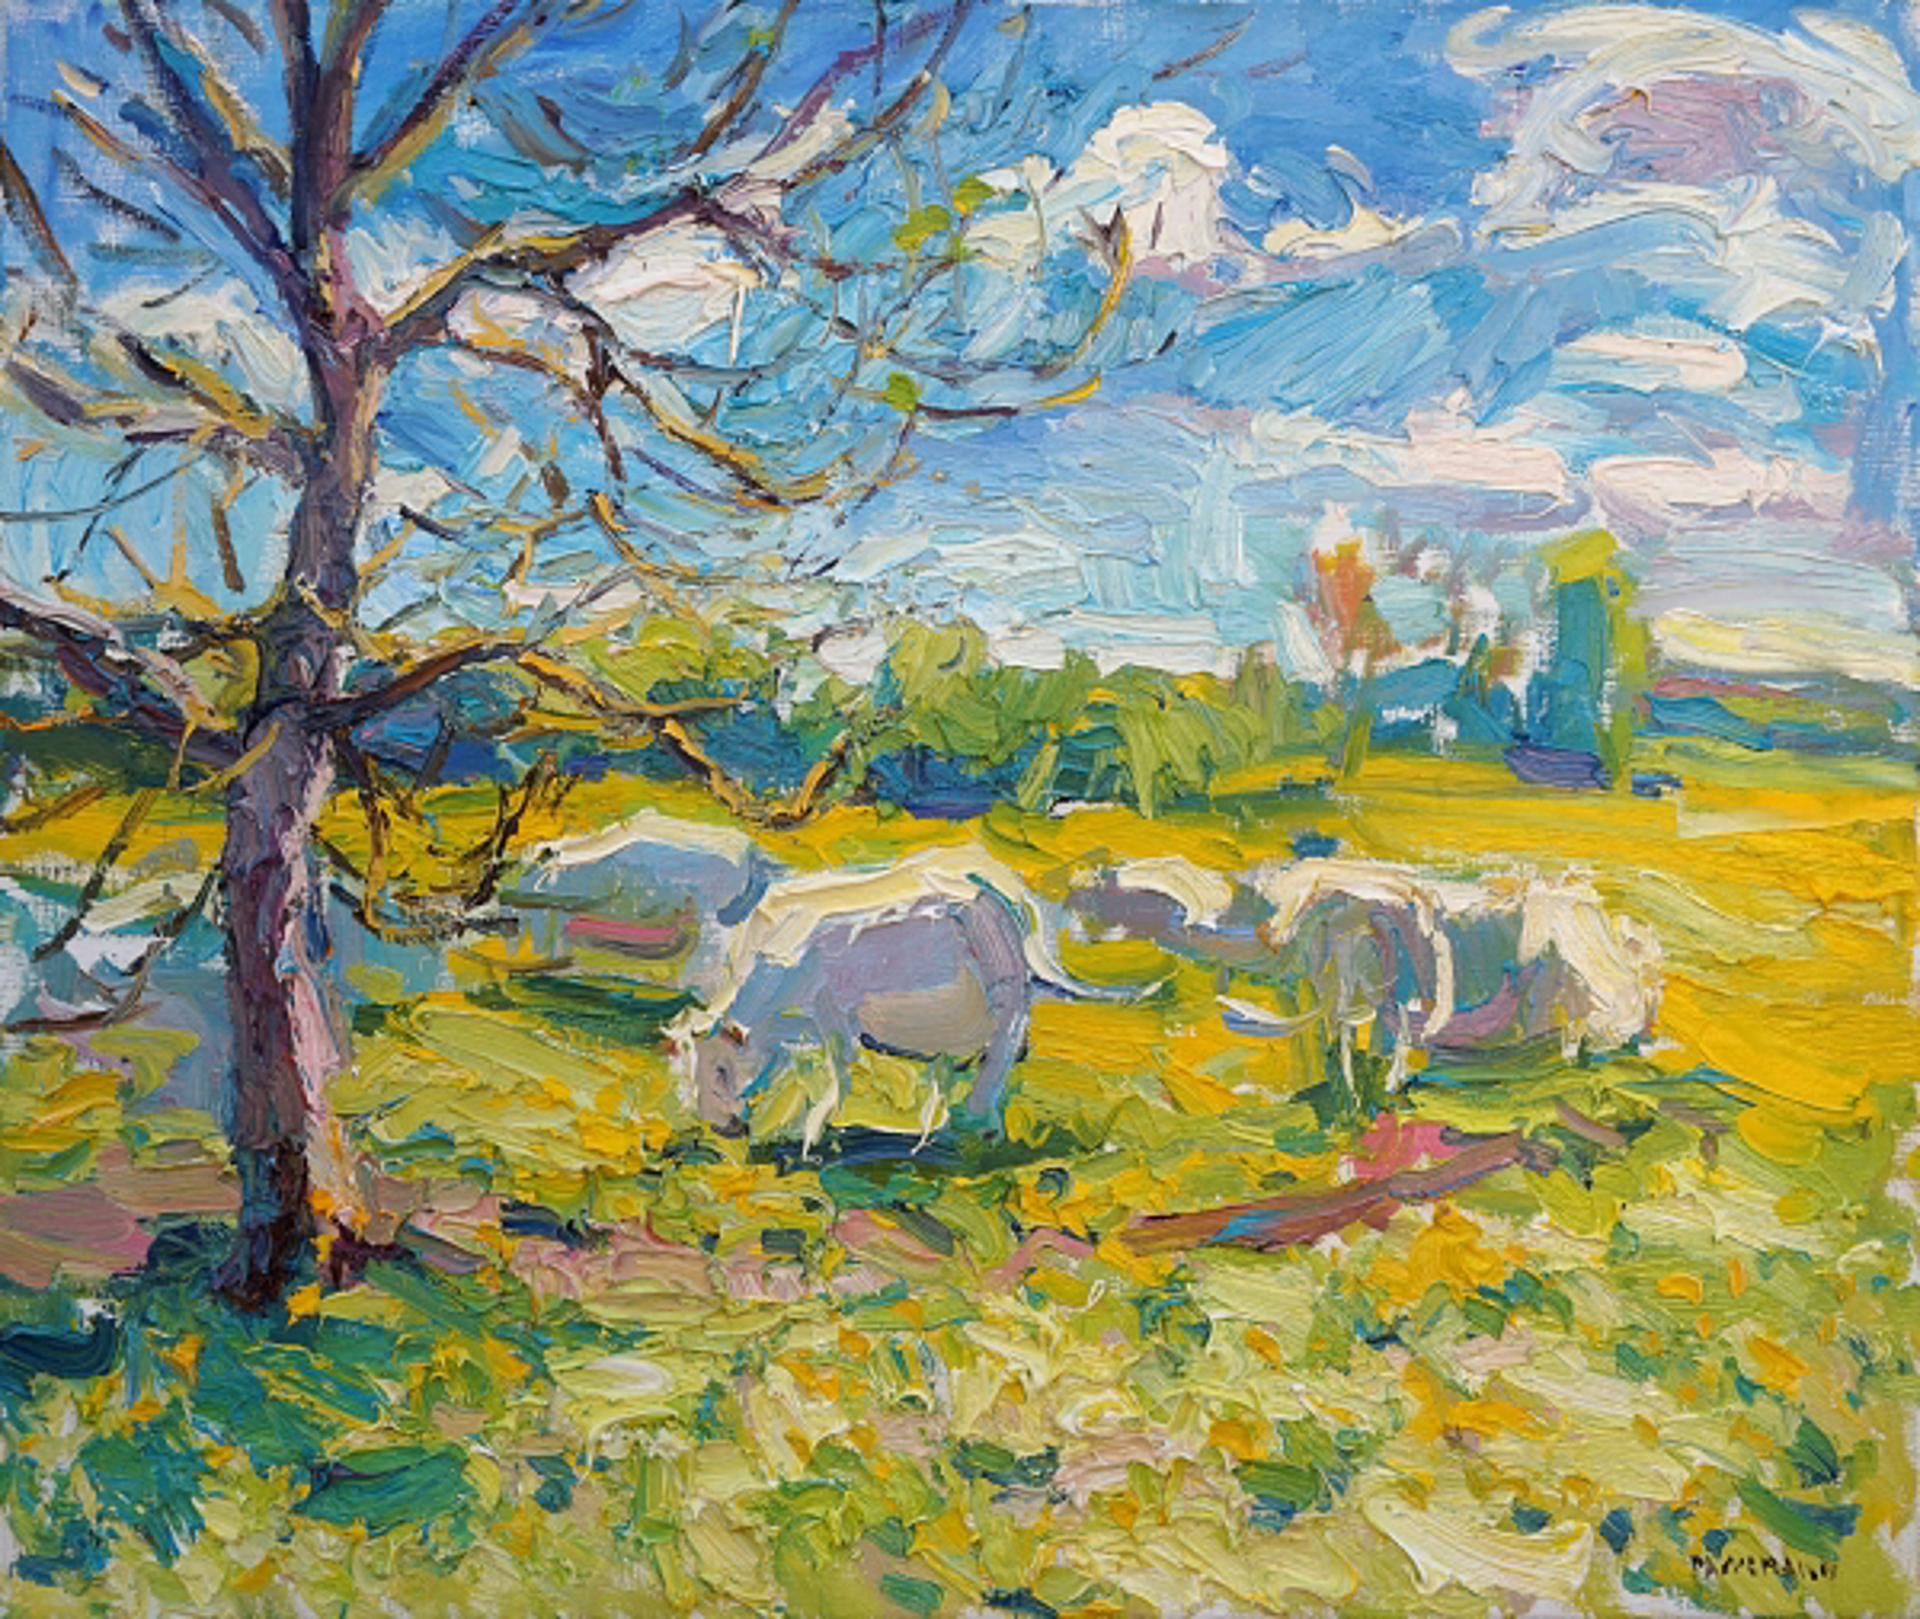 Cows in the Sun by Antonin Passemard